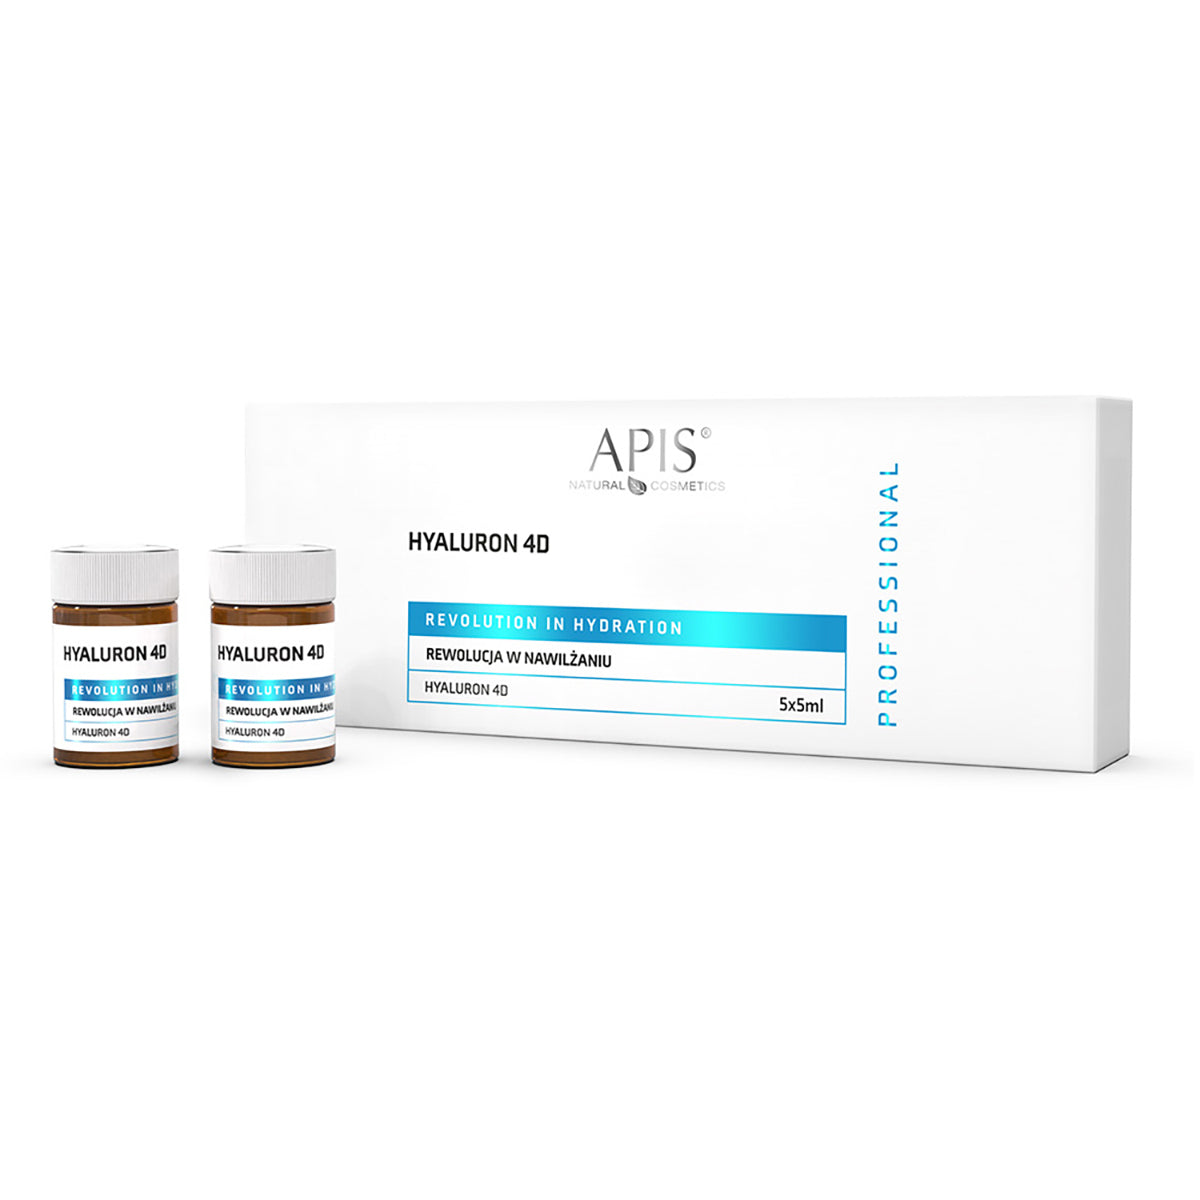 Apis ampoules a revolution in moisturizing hyaluron 4d 5x5ml